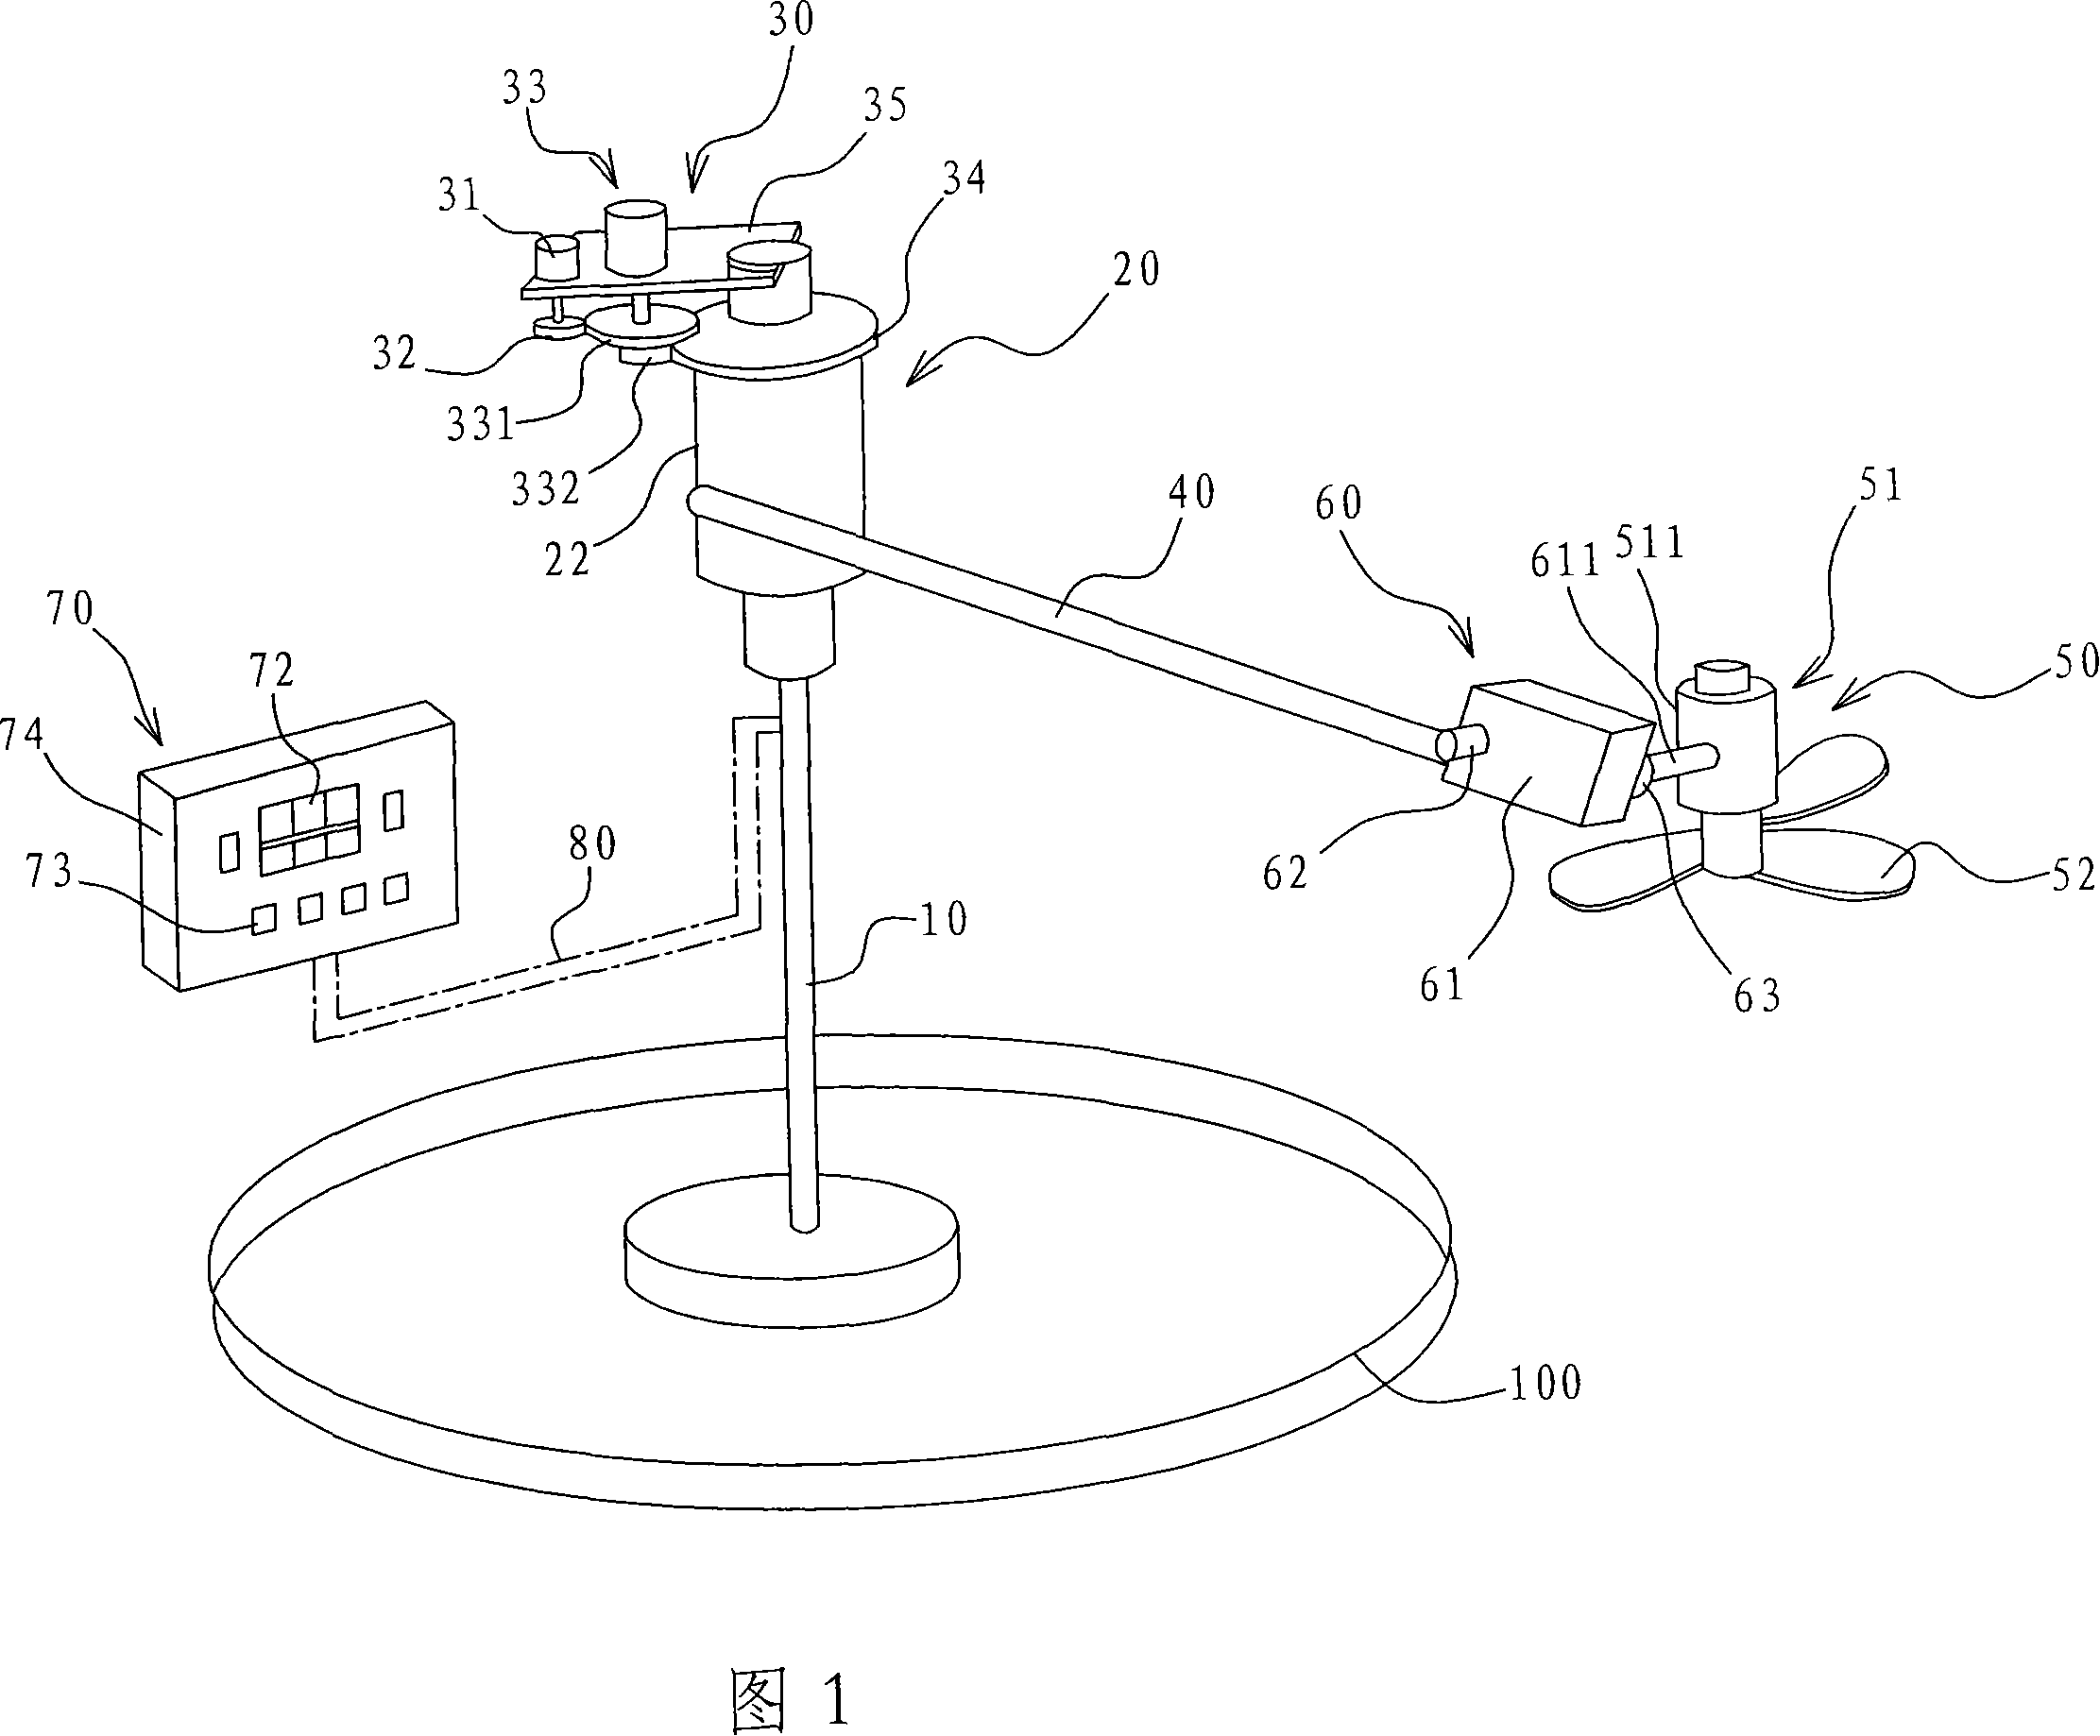 Tree-dimensional rotary knitting loom dust cleaning apparatus